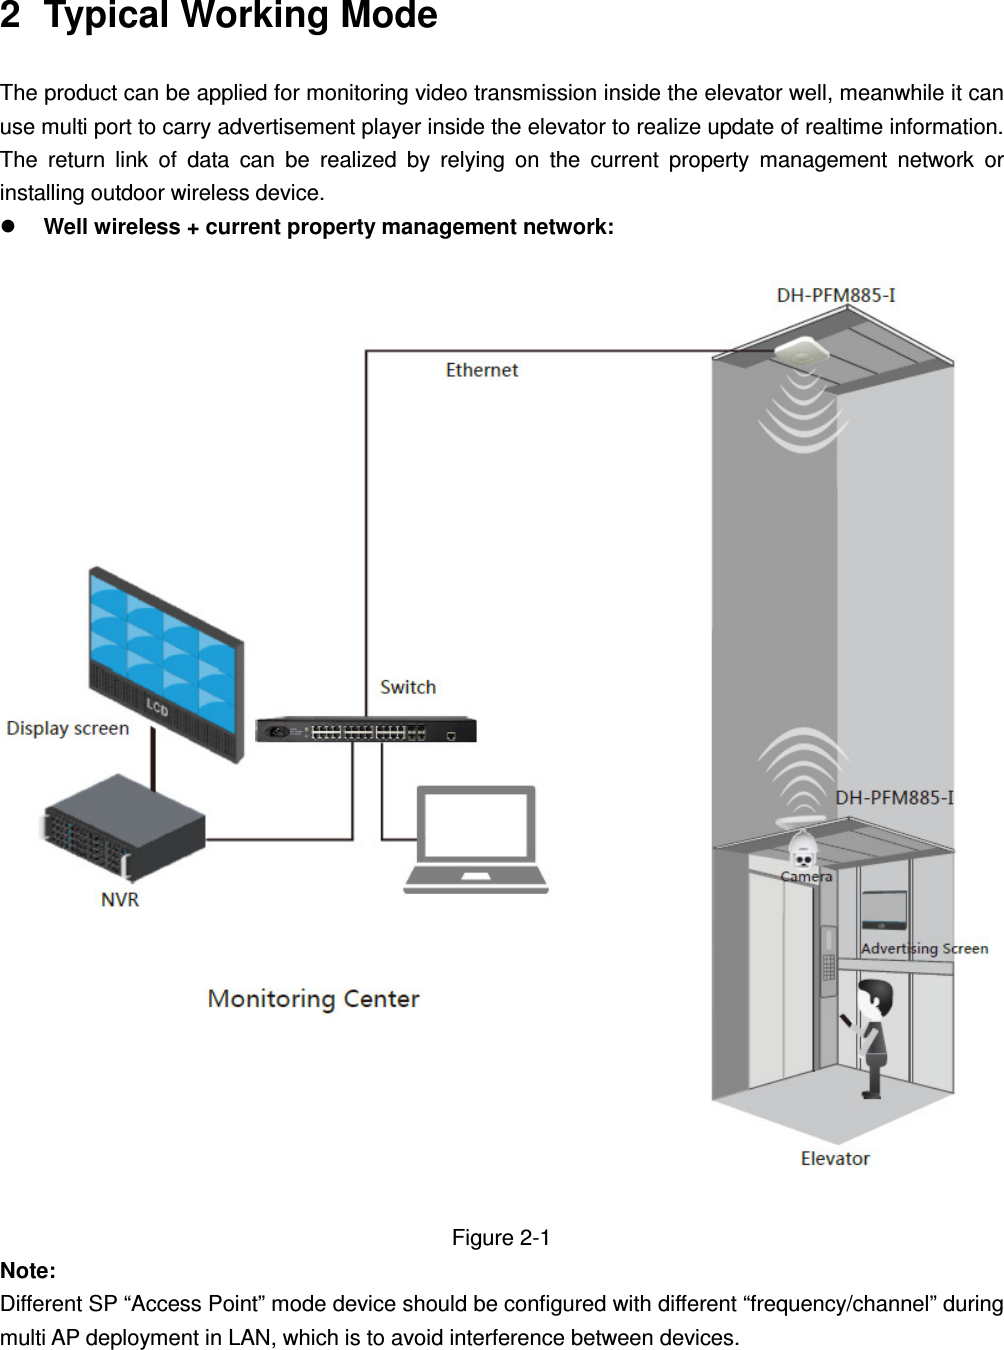    2  Typical Working Mode   The product can be applied for monitoring video transmission inside the elevator well, meanwhile it can use multi port to carry advertisement player inside the elevator to realize update of realtime information. The  return  link  of  data  can  be  realized  by  relying  on  the  current  property  management  network  or installing outdoor wireless device.    Well wireless + current property management network:    Figure 2-1 Note:   Different SP “Access Point” mode device should be configured with different “frequency/channel” during multi AP deployment in LAN, which is to avoid interference between devices.    